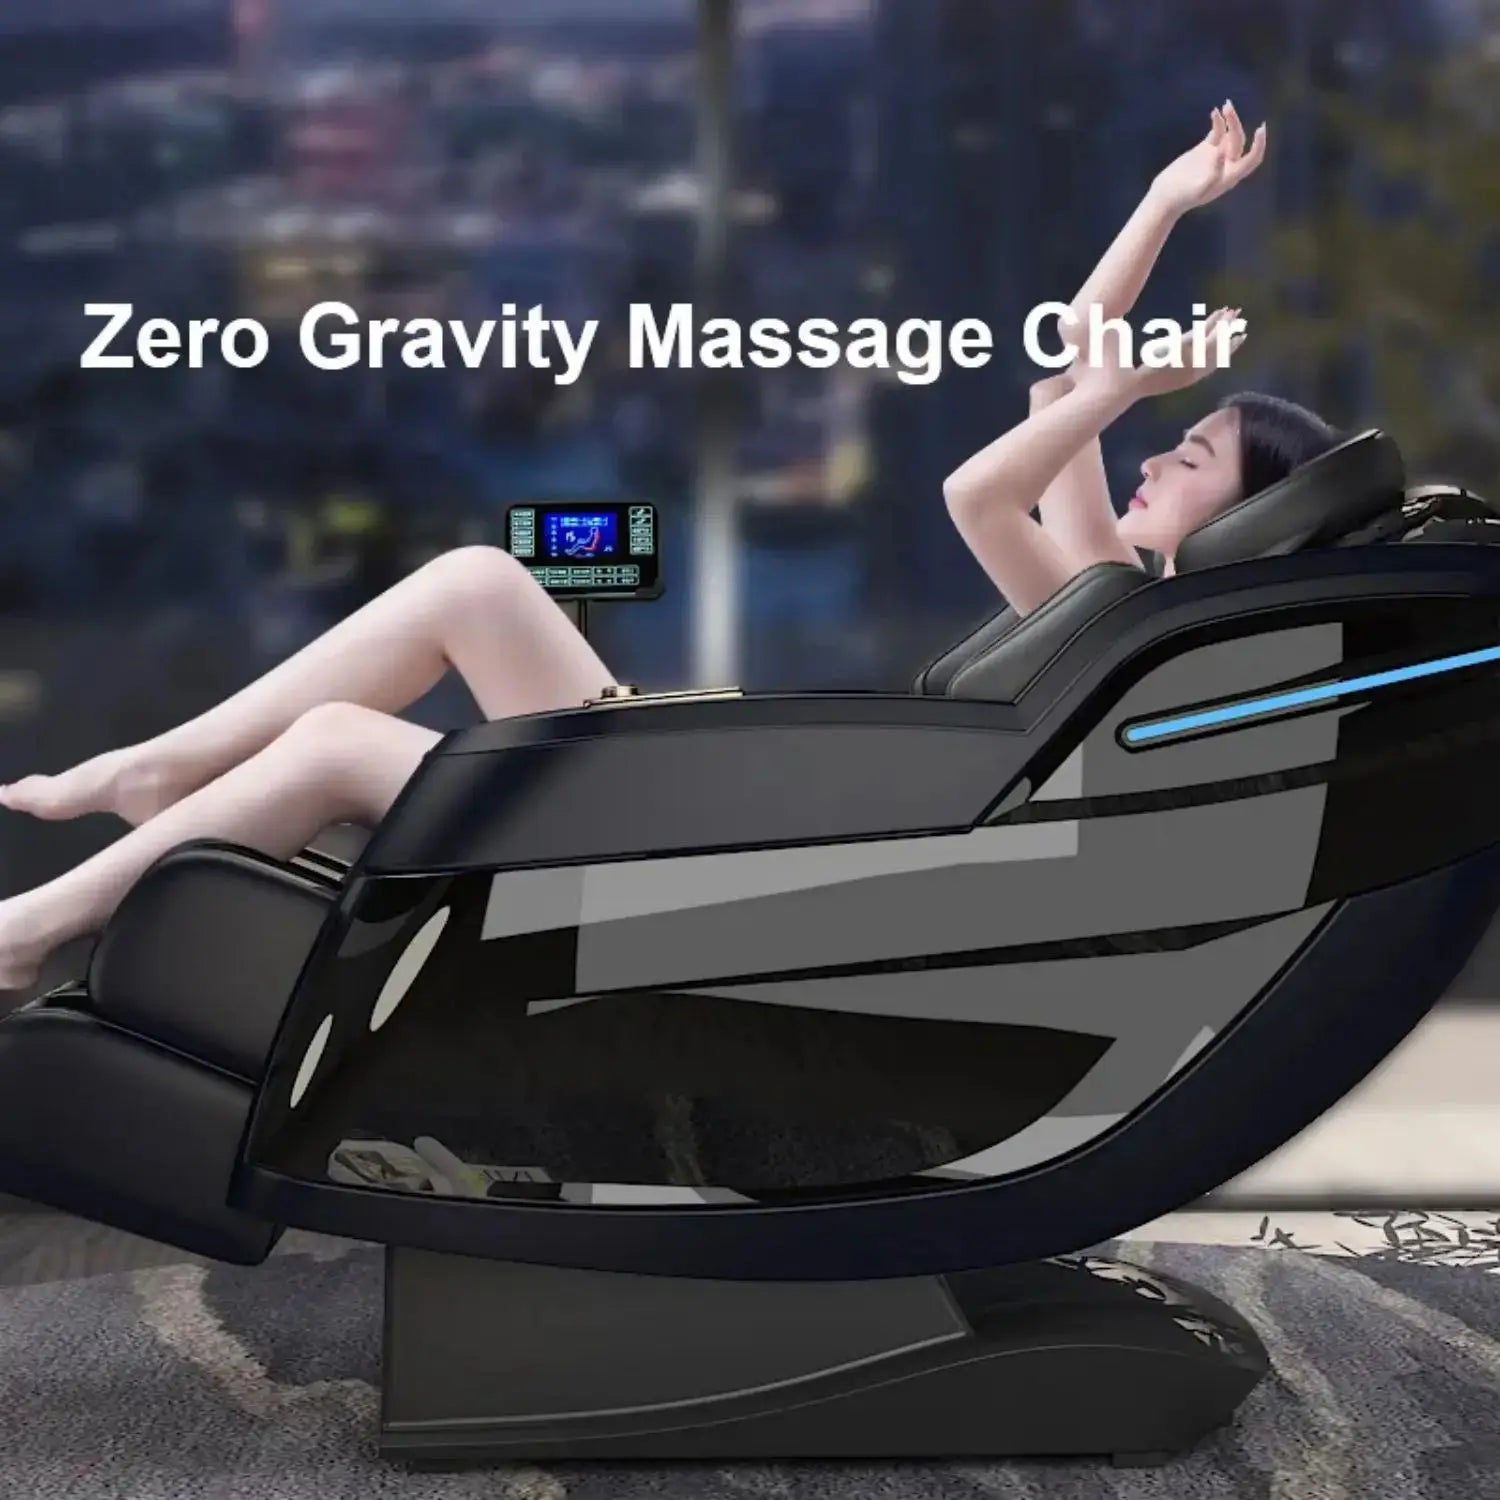 3 Year Warranty UKLife Newest Massage Chair 4D Full Body AirBag Zero Gravity Heat AI voice Office Chair Massage Sofa Home Chair